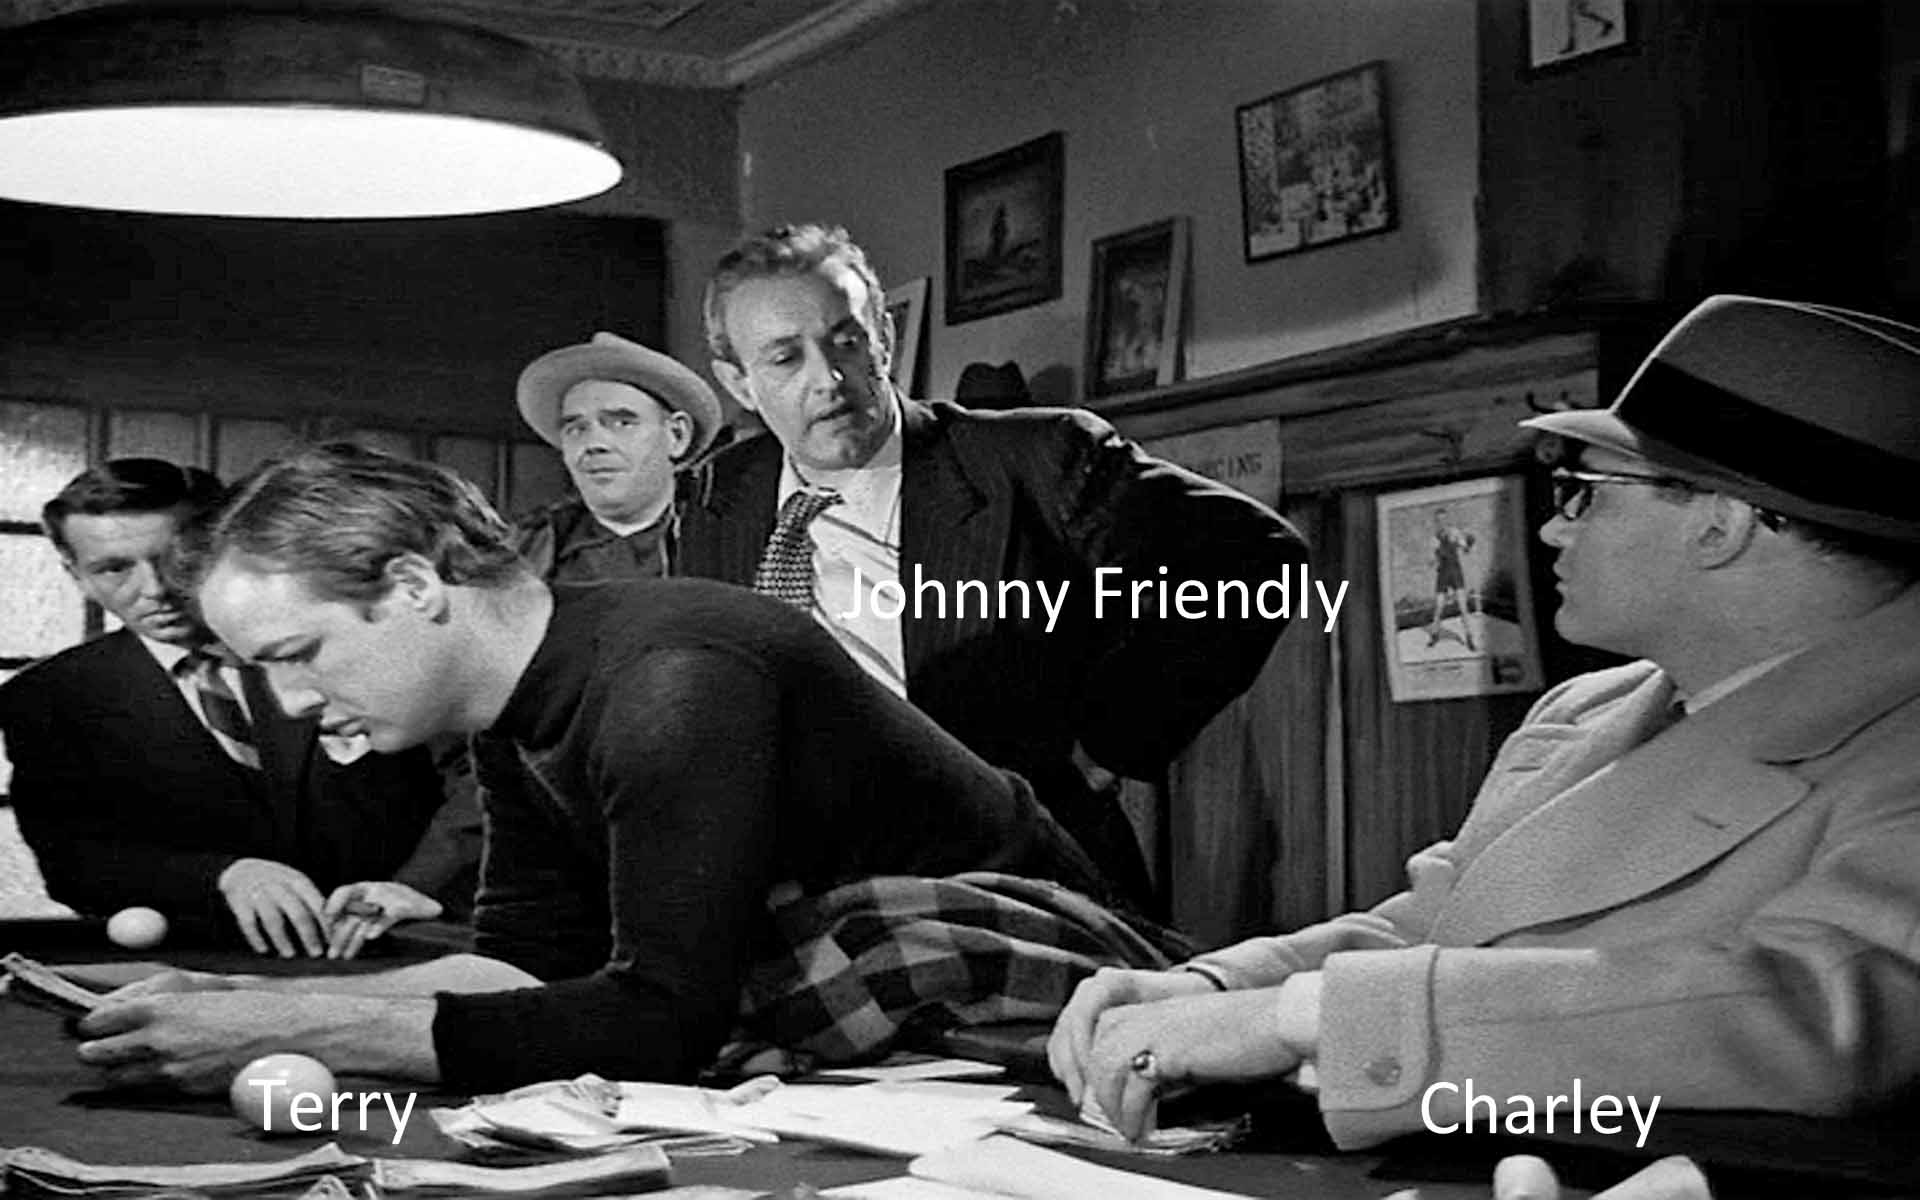 Terry, Johnny Friendly, Charley